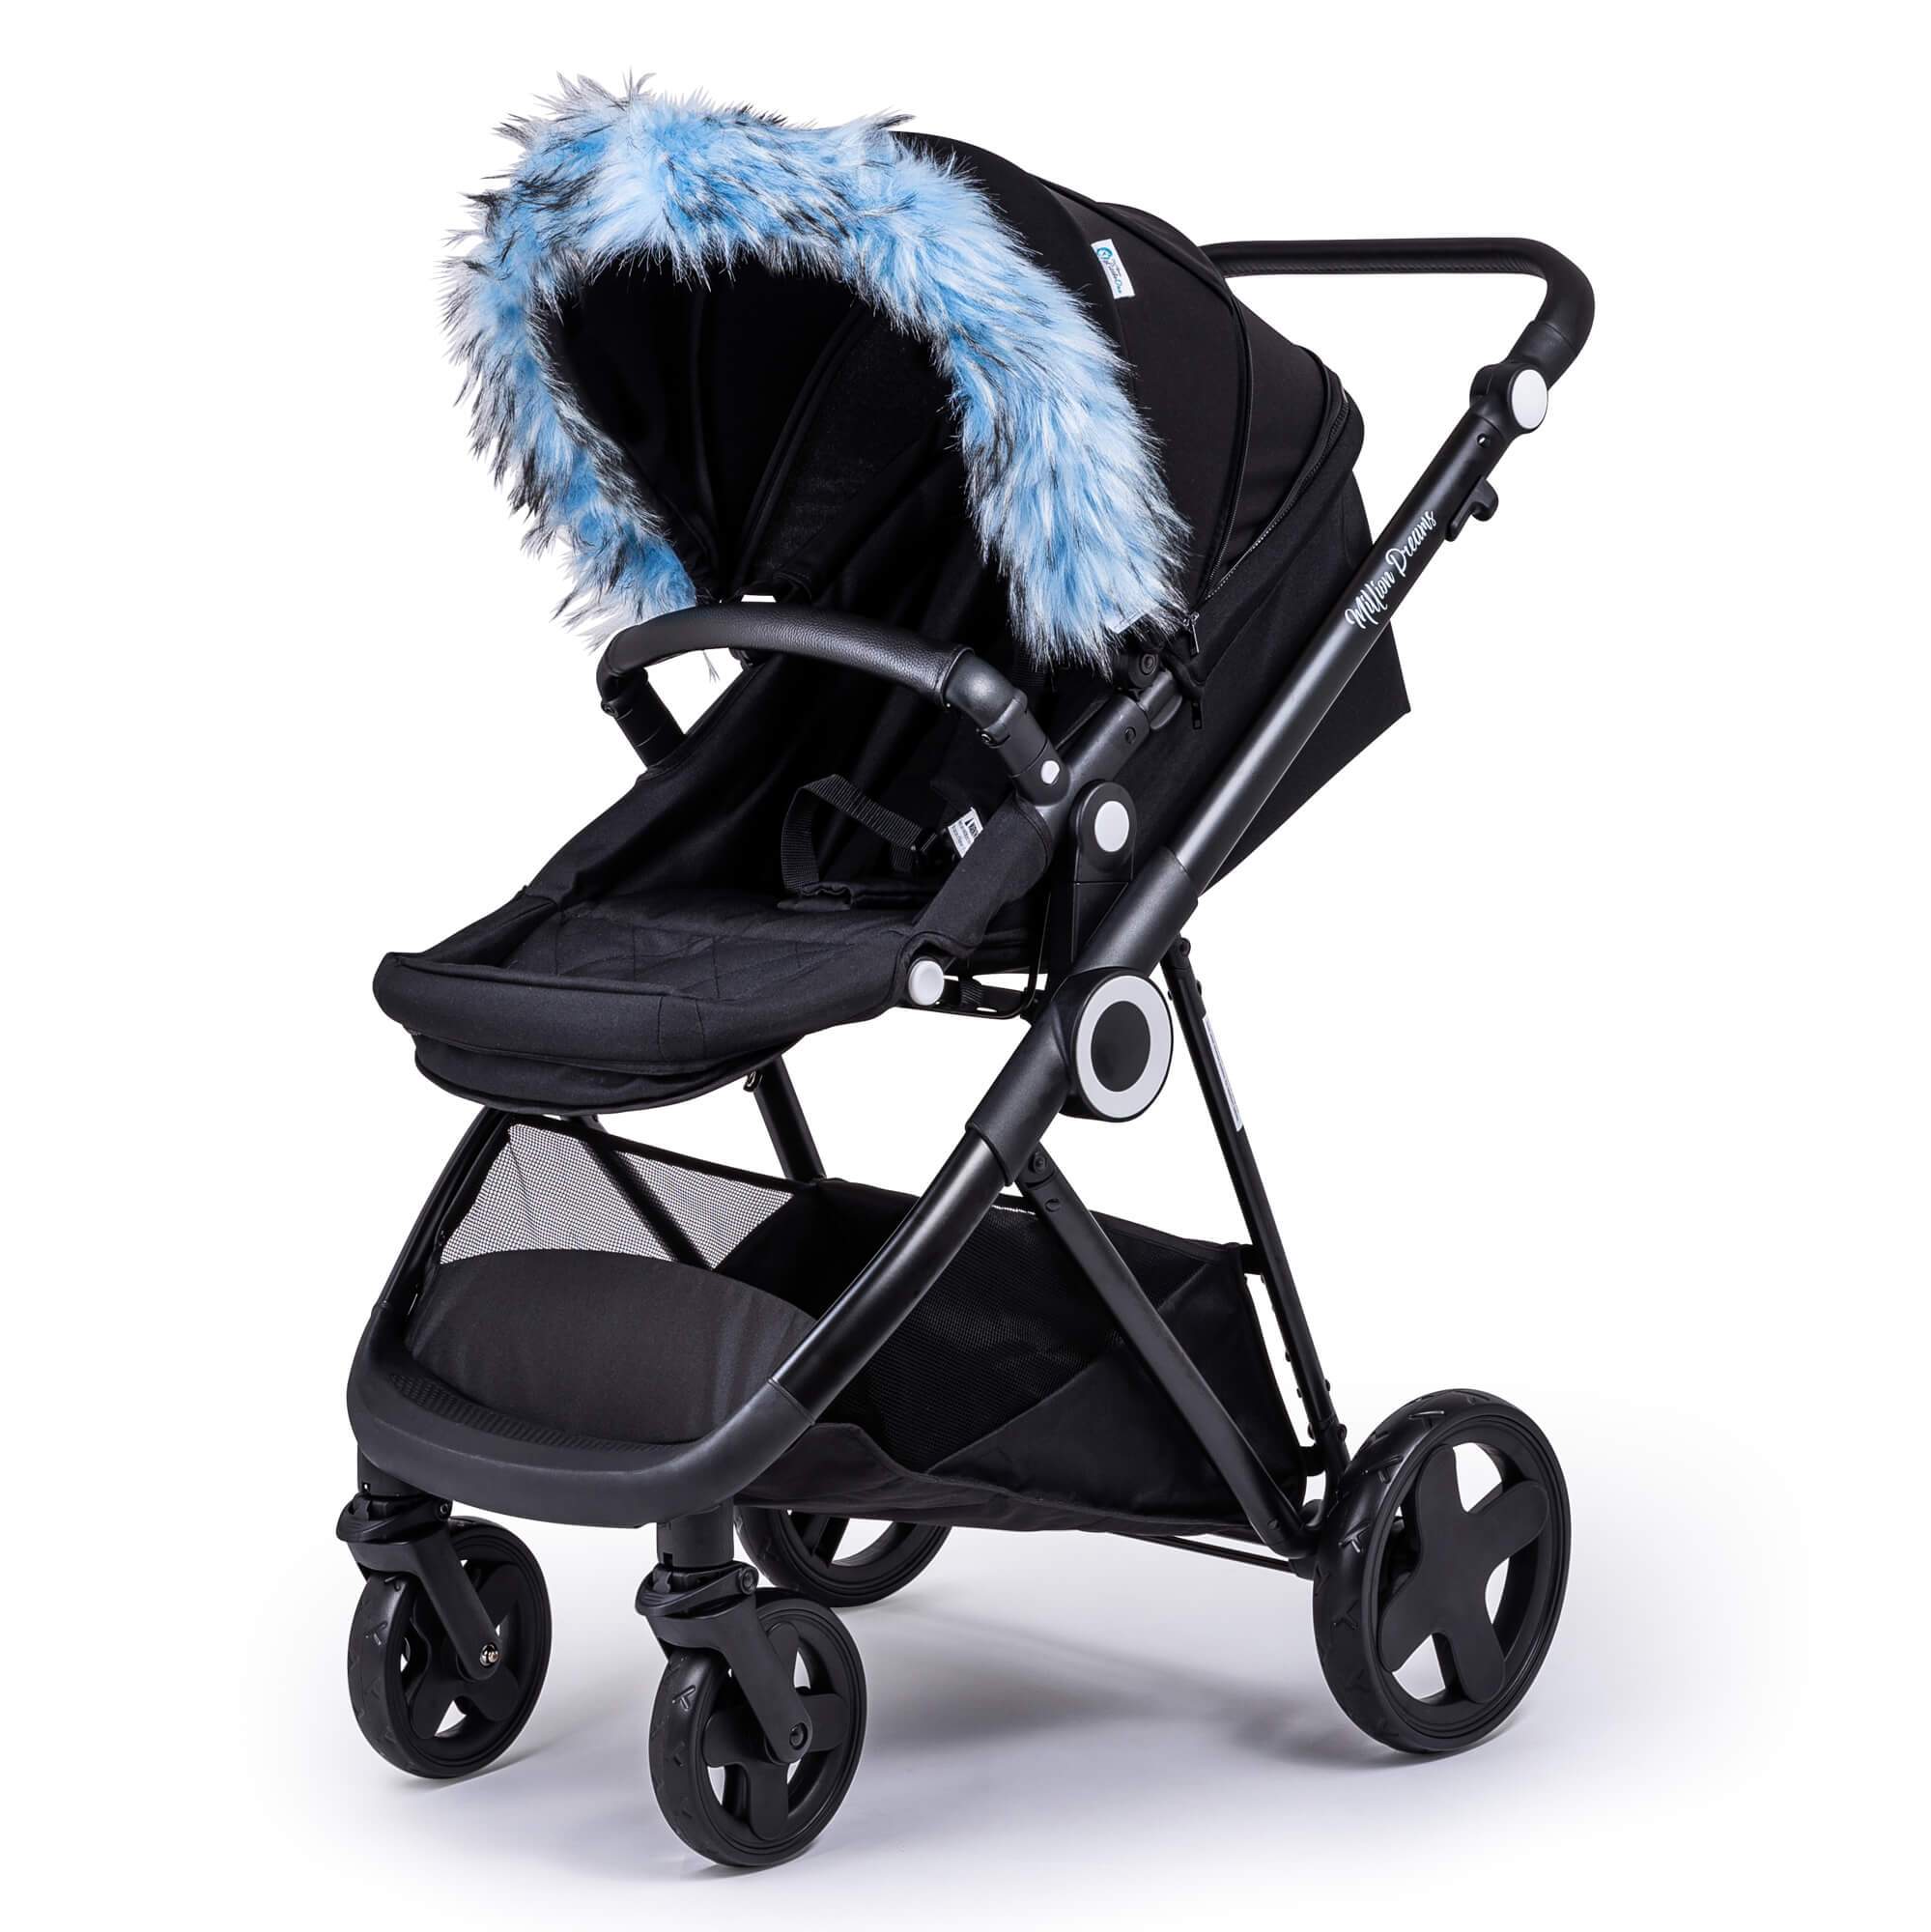 Pram Fur Hood Trim Attachment for Pushchair Compatible with Baby Trend - Light Blue / Fits All Models | For Your Little One